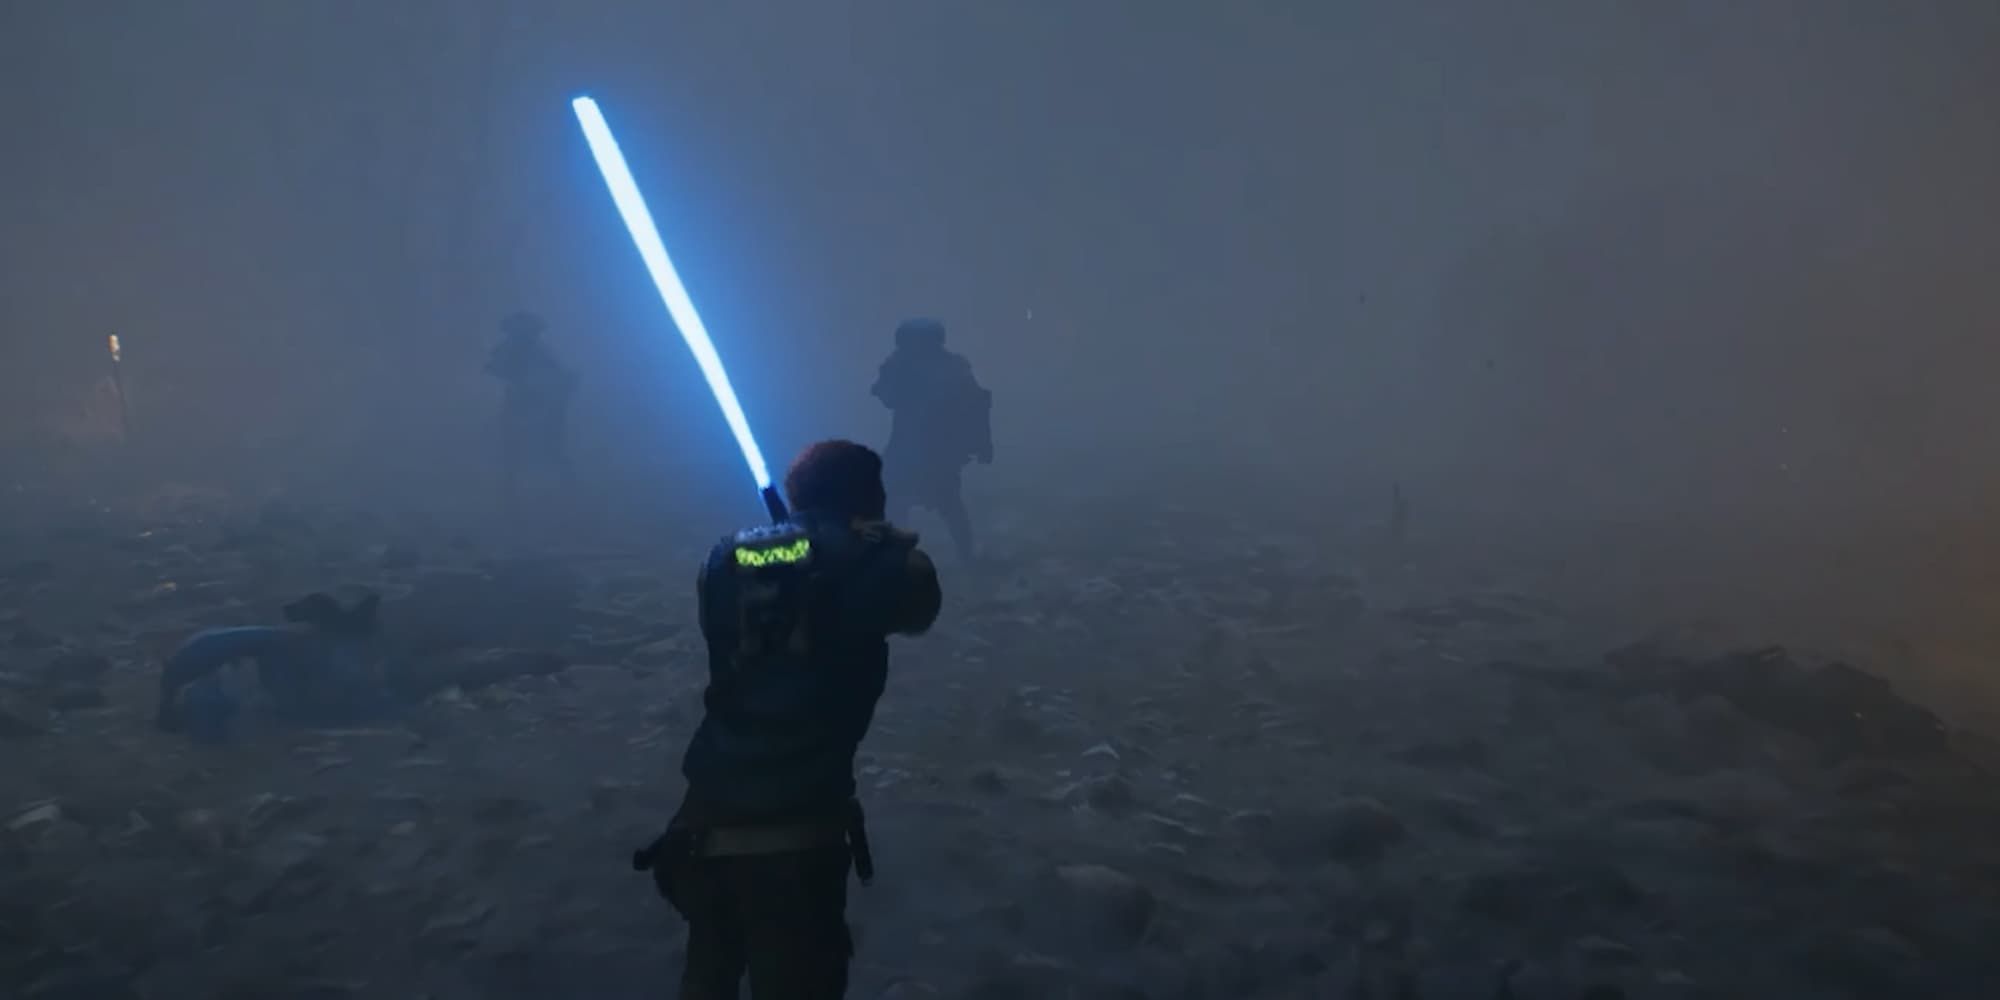 In Star Wars Jedi: Survivor, Cal raises his lightsaber to block an attack from Vaslyn Martz in the fog.